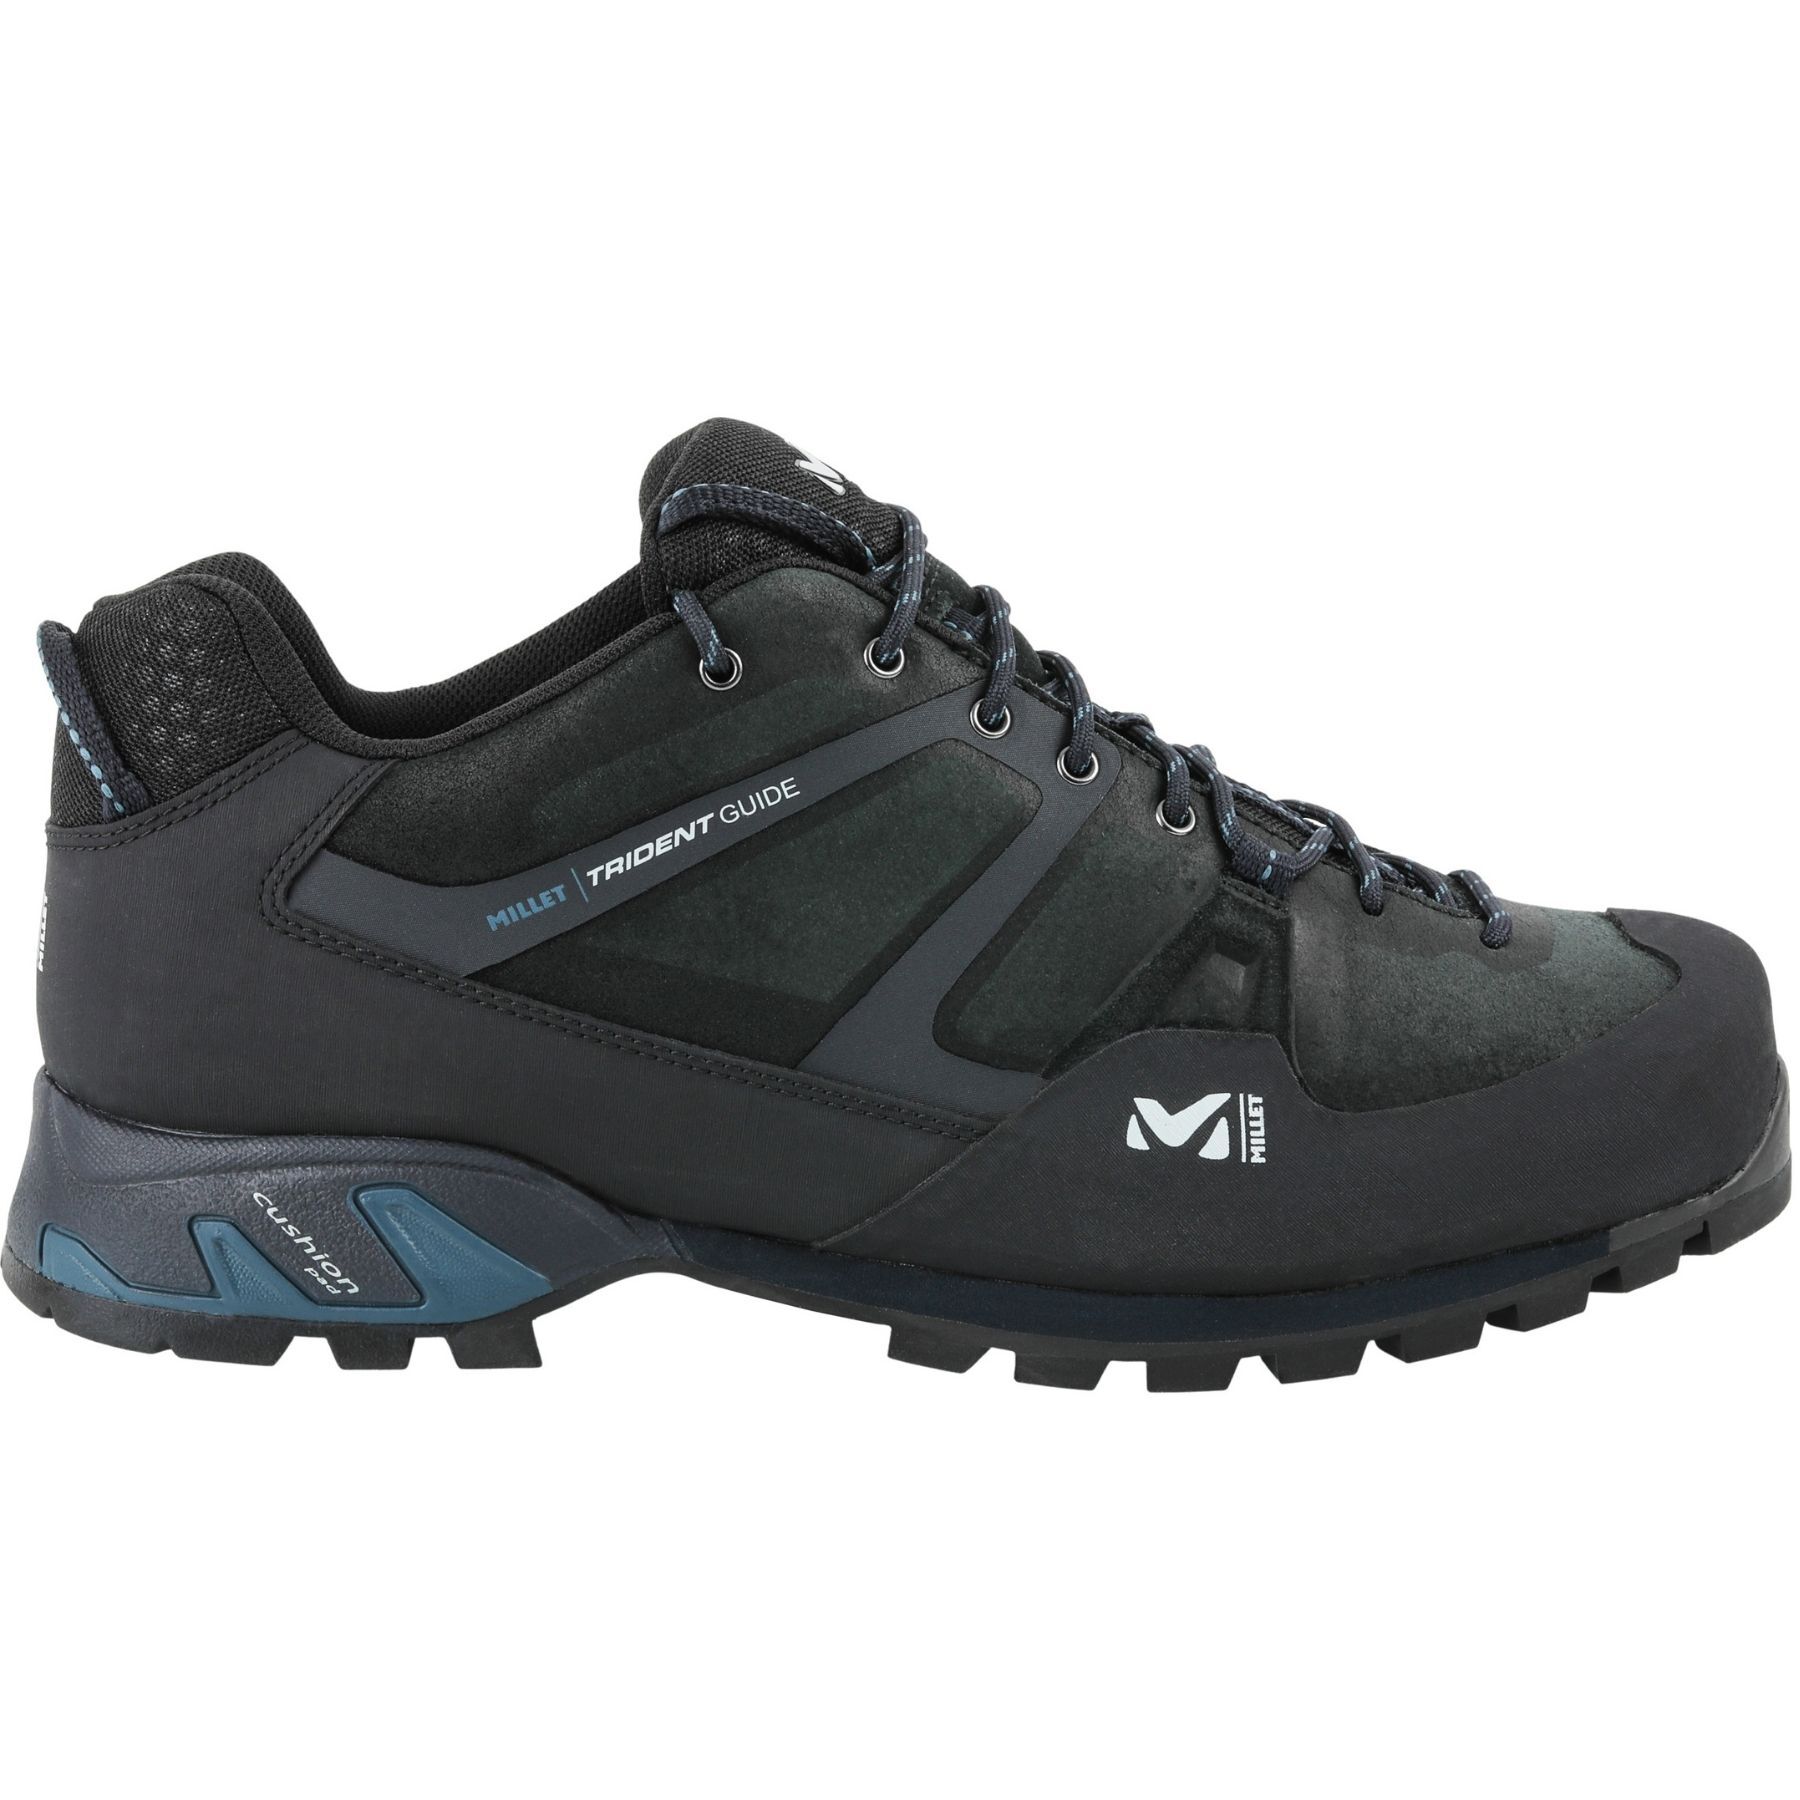 Millet Trident Guide - Approach shoes